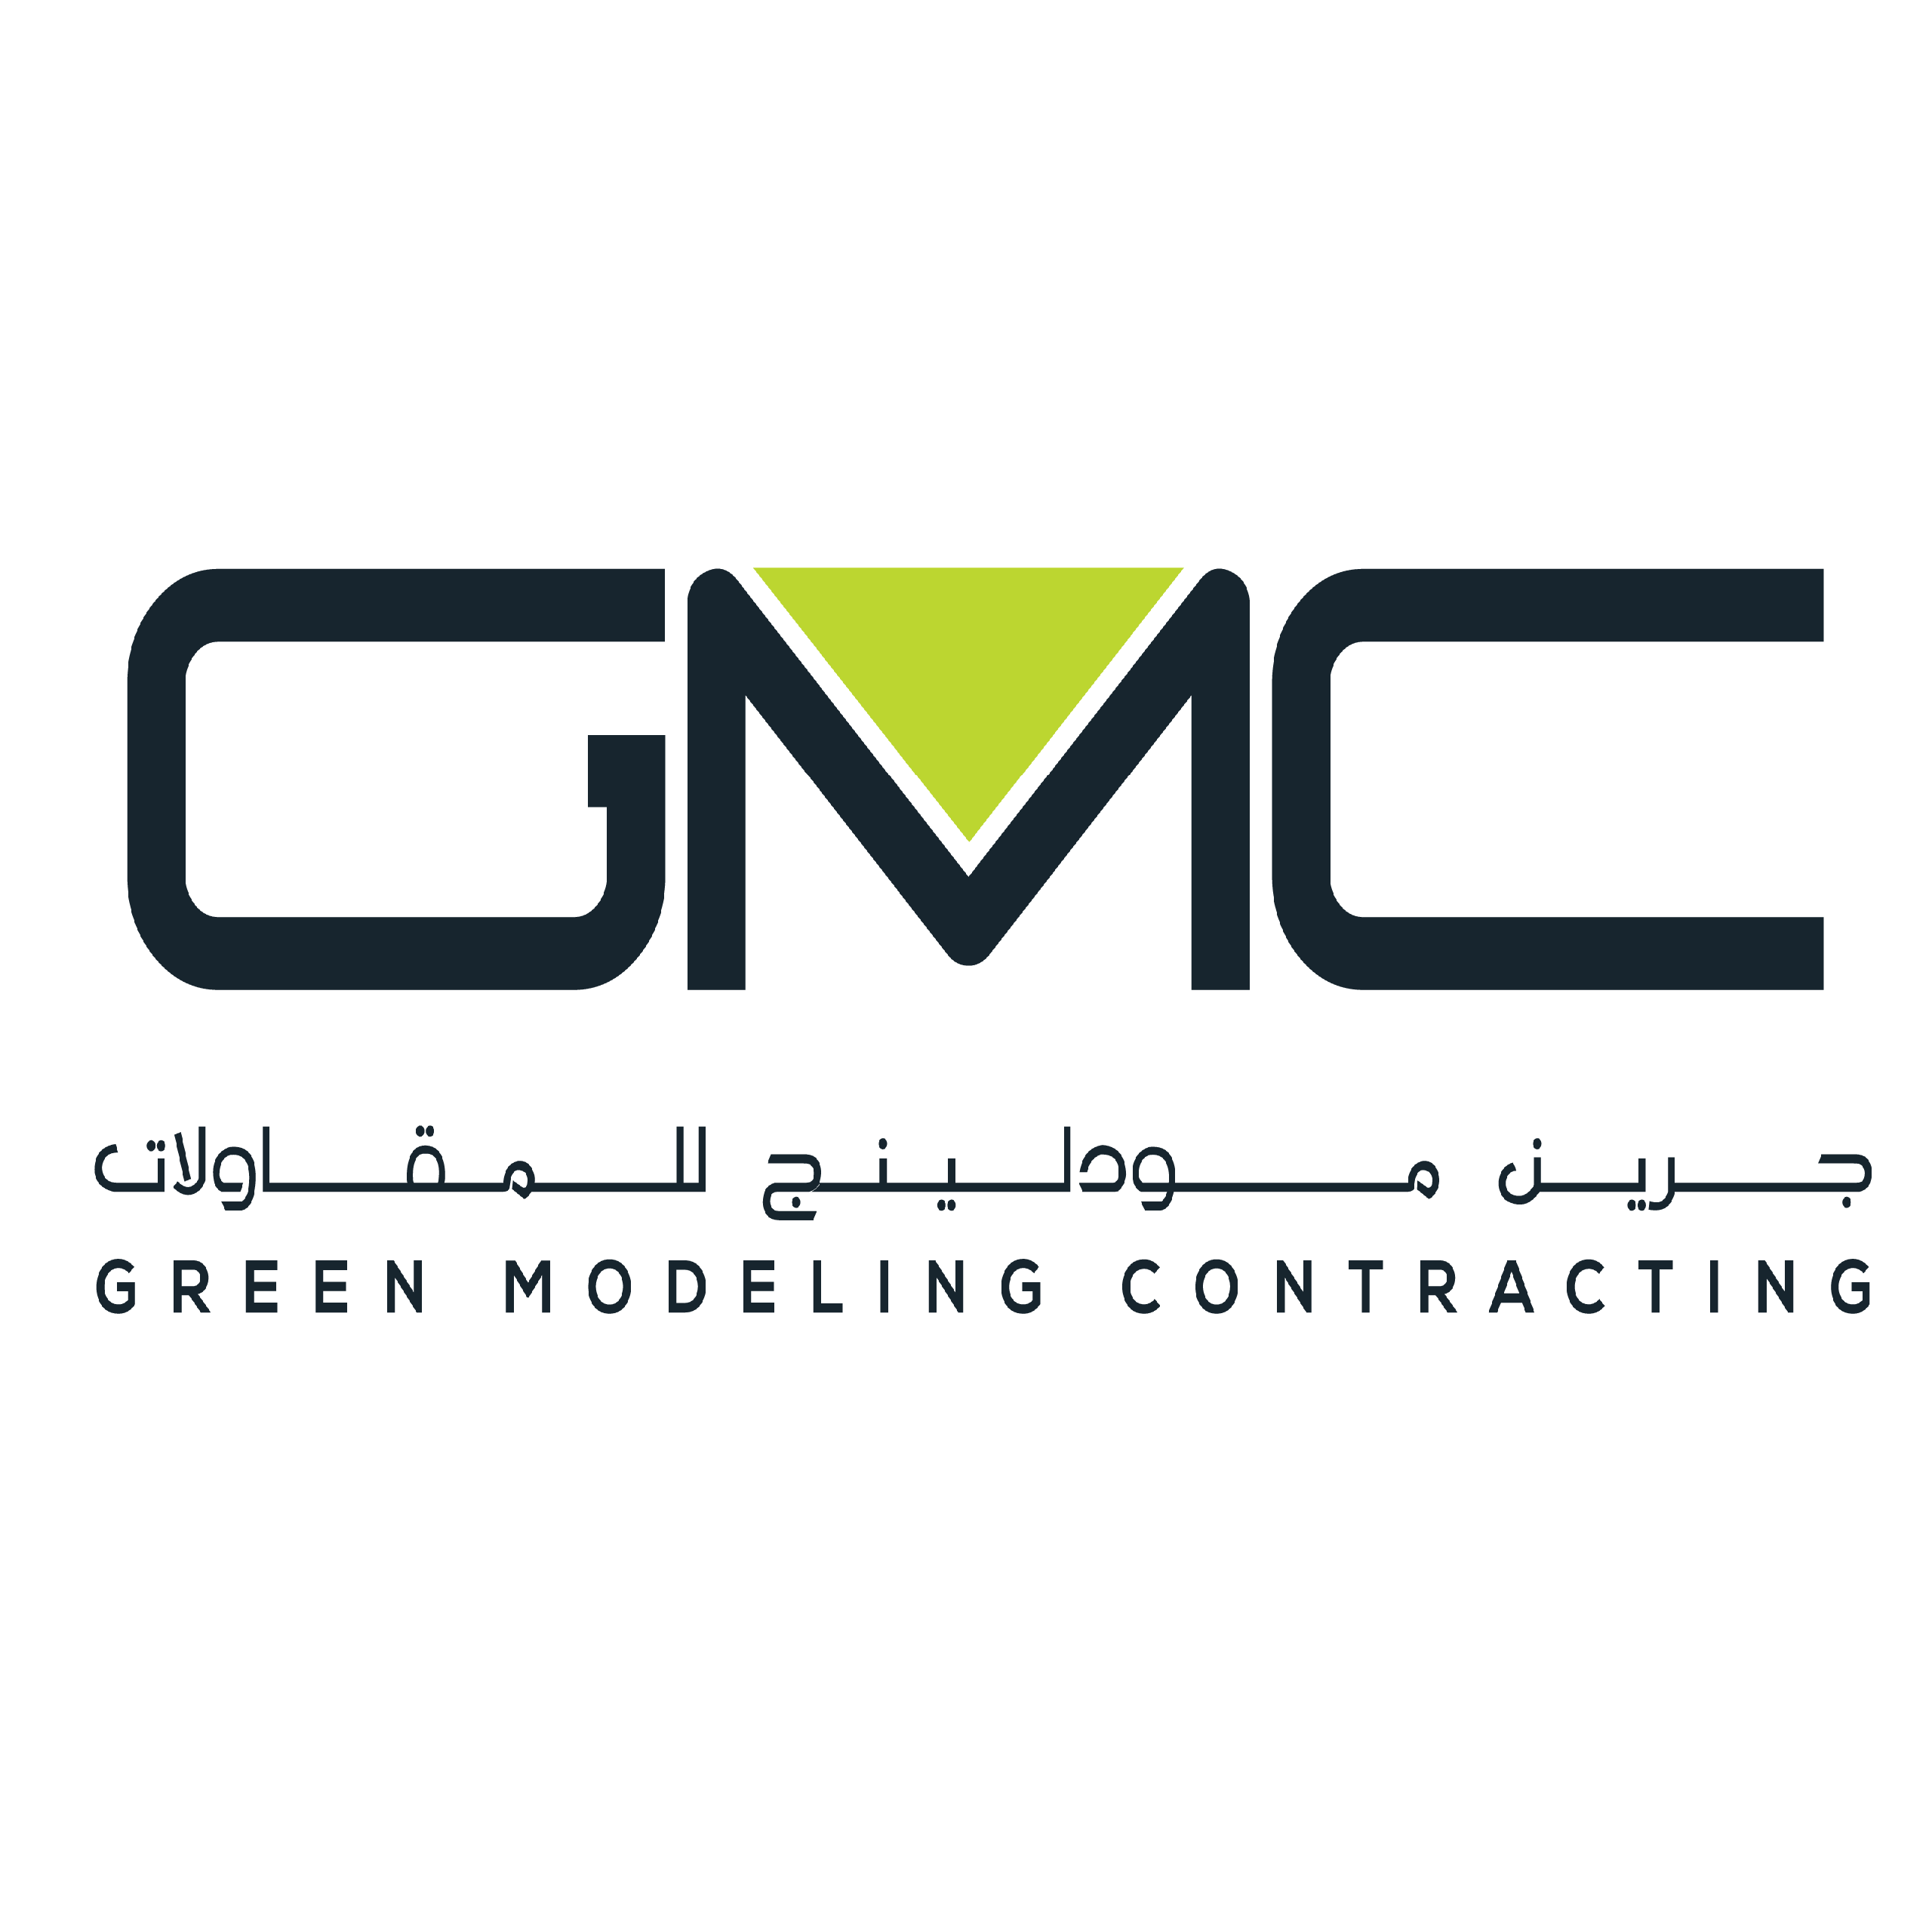 Green Modeling Contracting